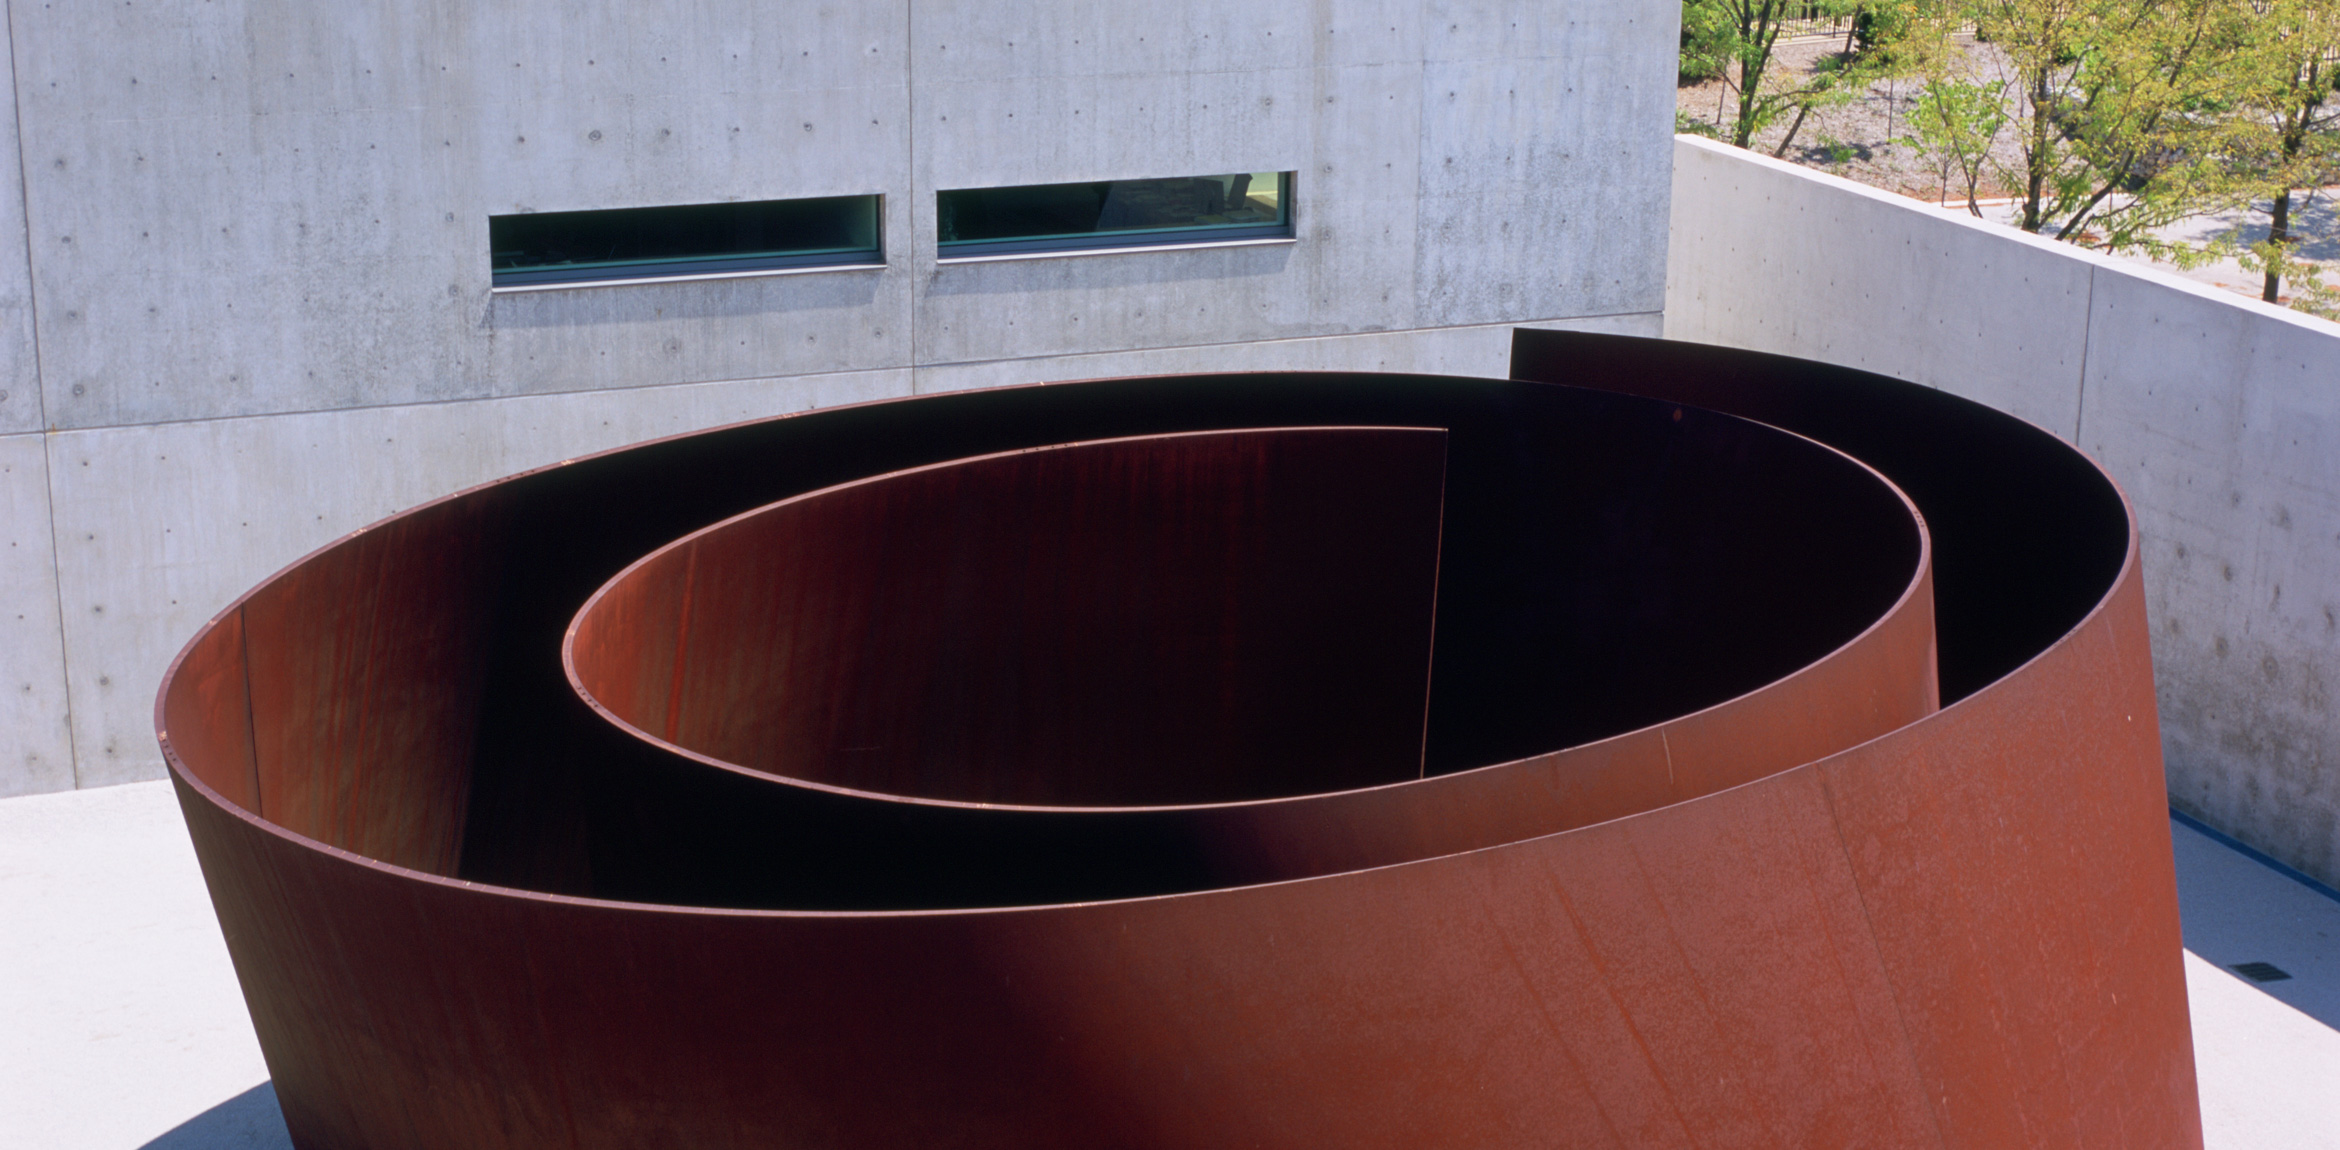 An elevated view of Richard Serra's 